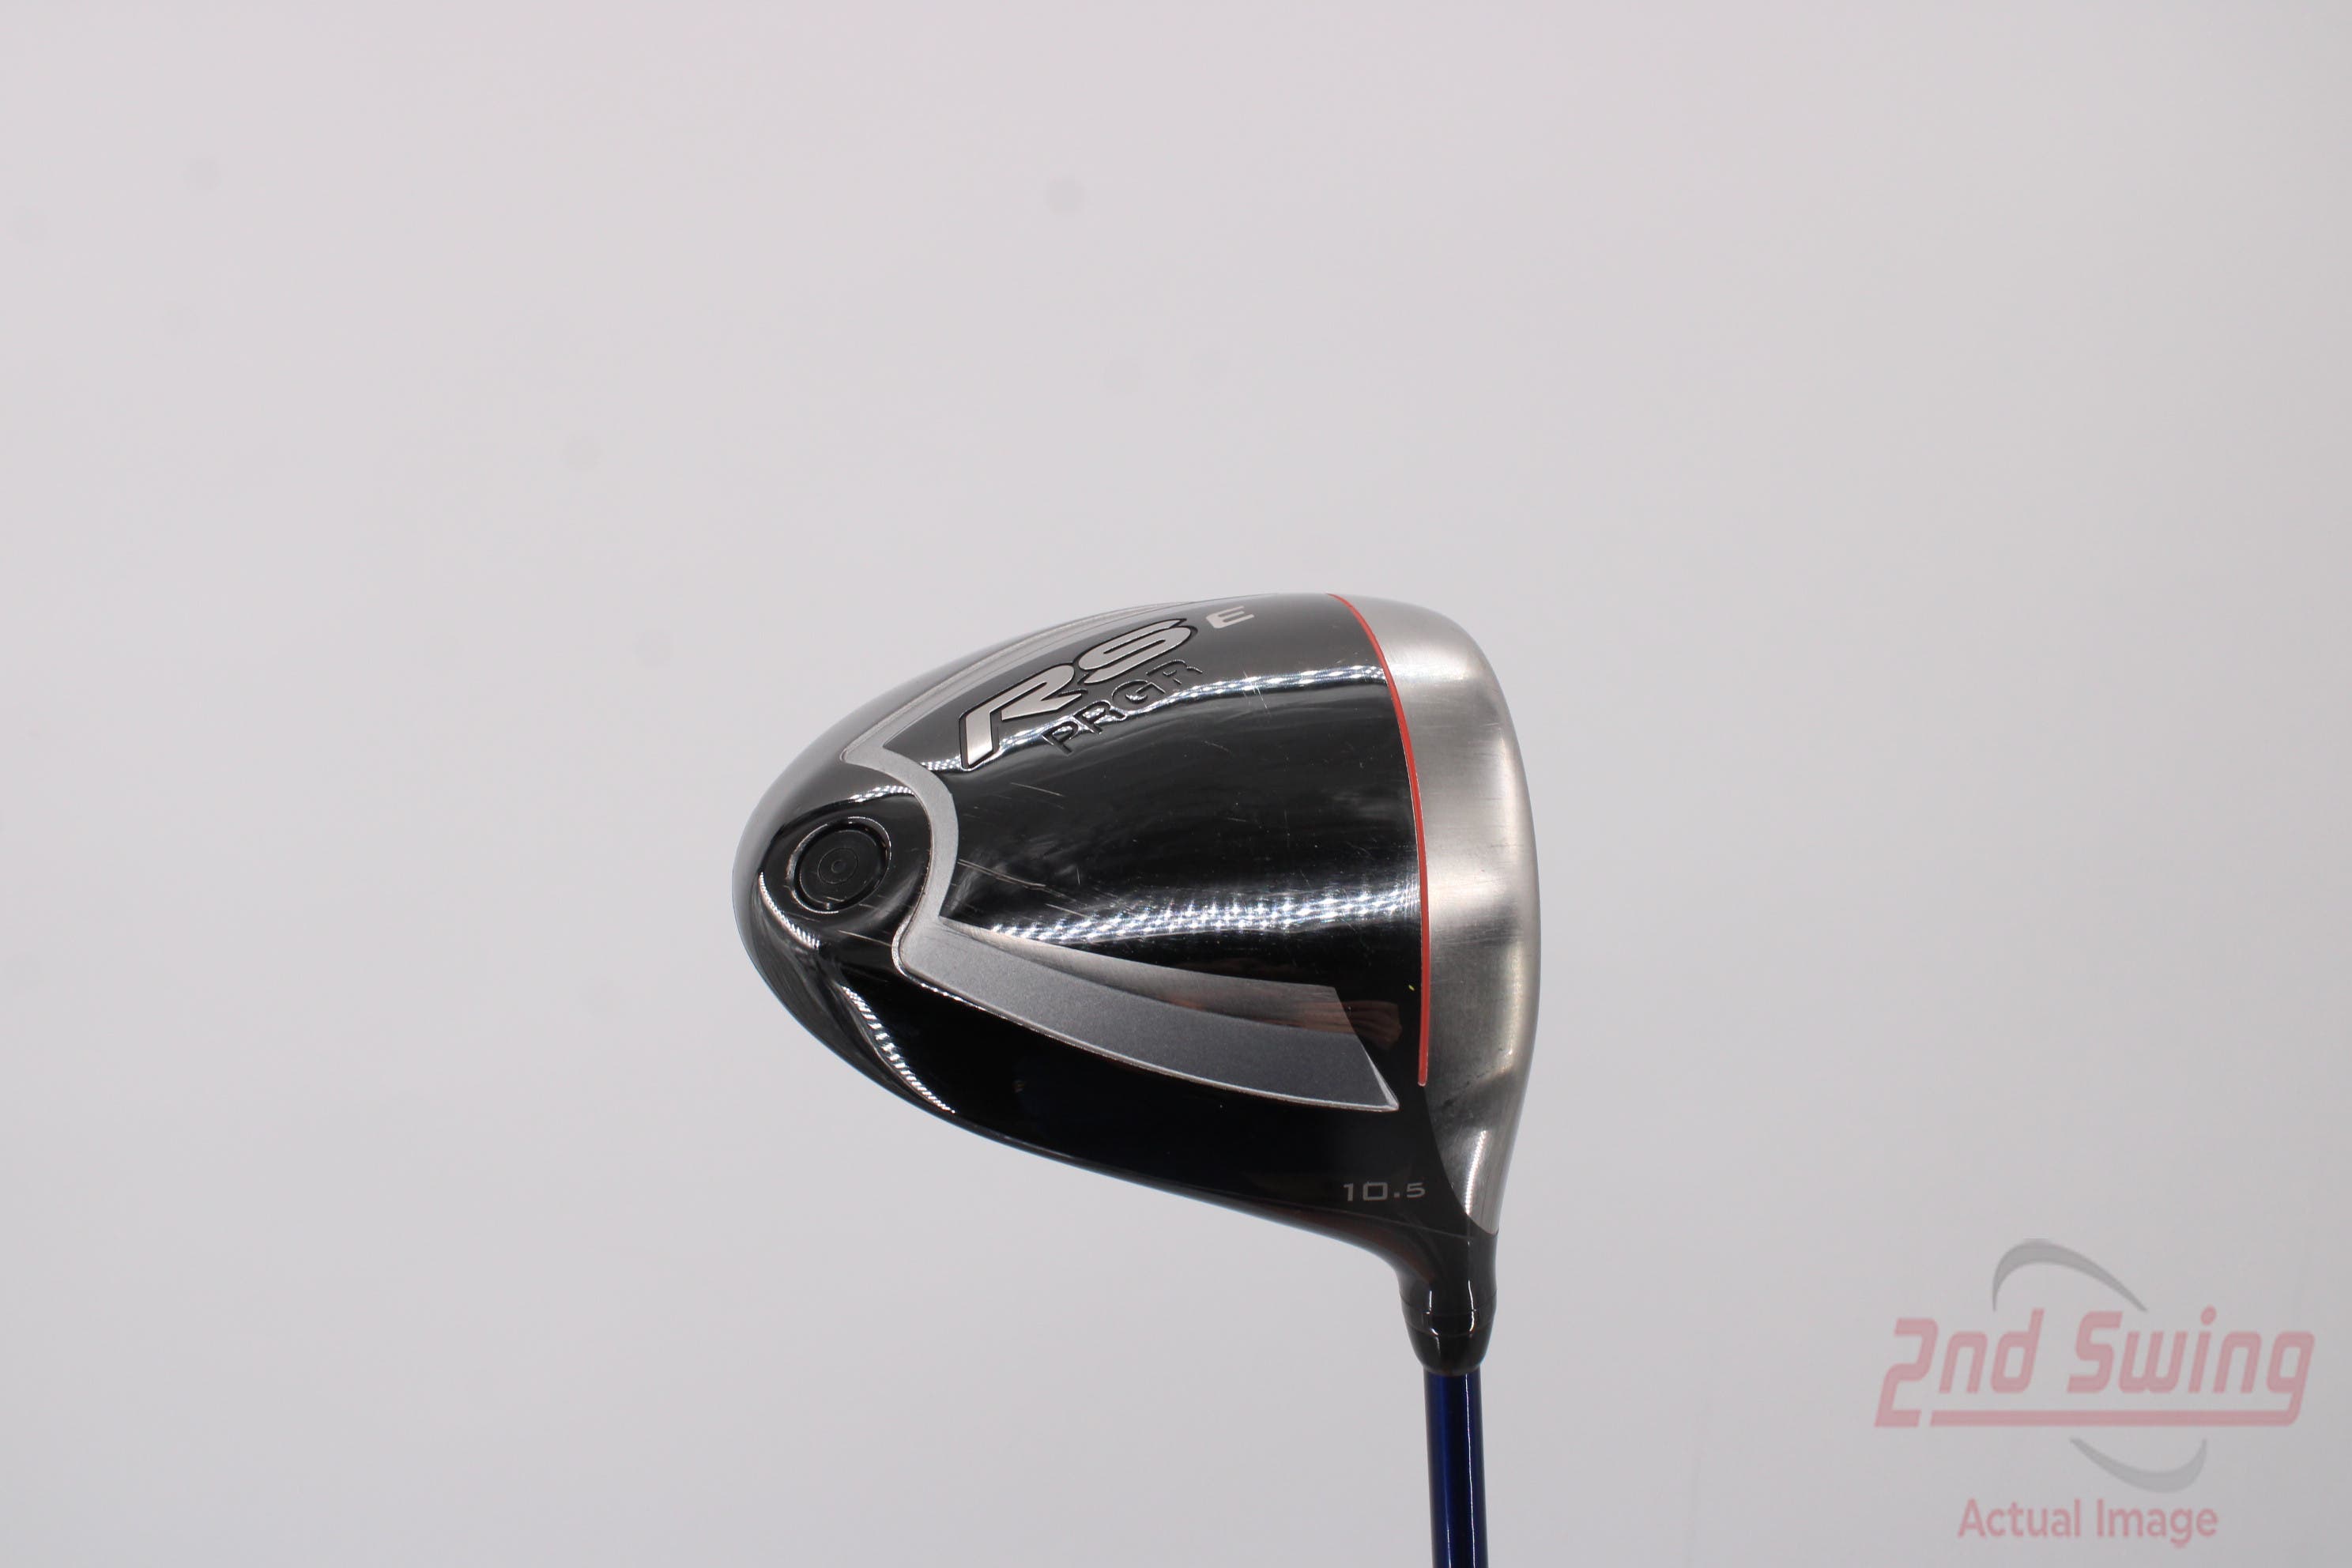 PRGR RS E Driver (D-T2226450059) | 2nd Swing Golf